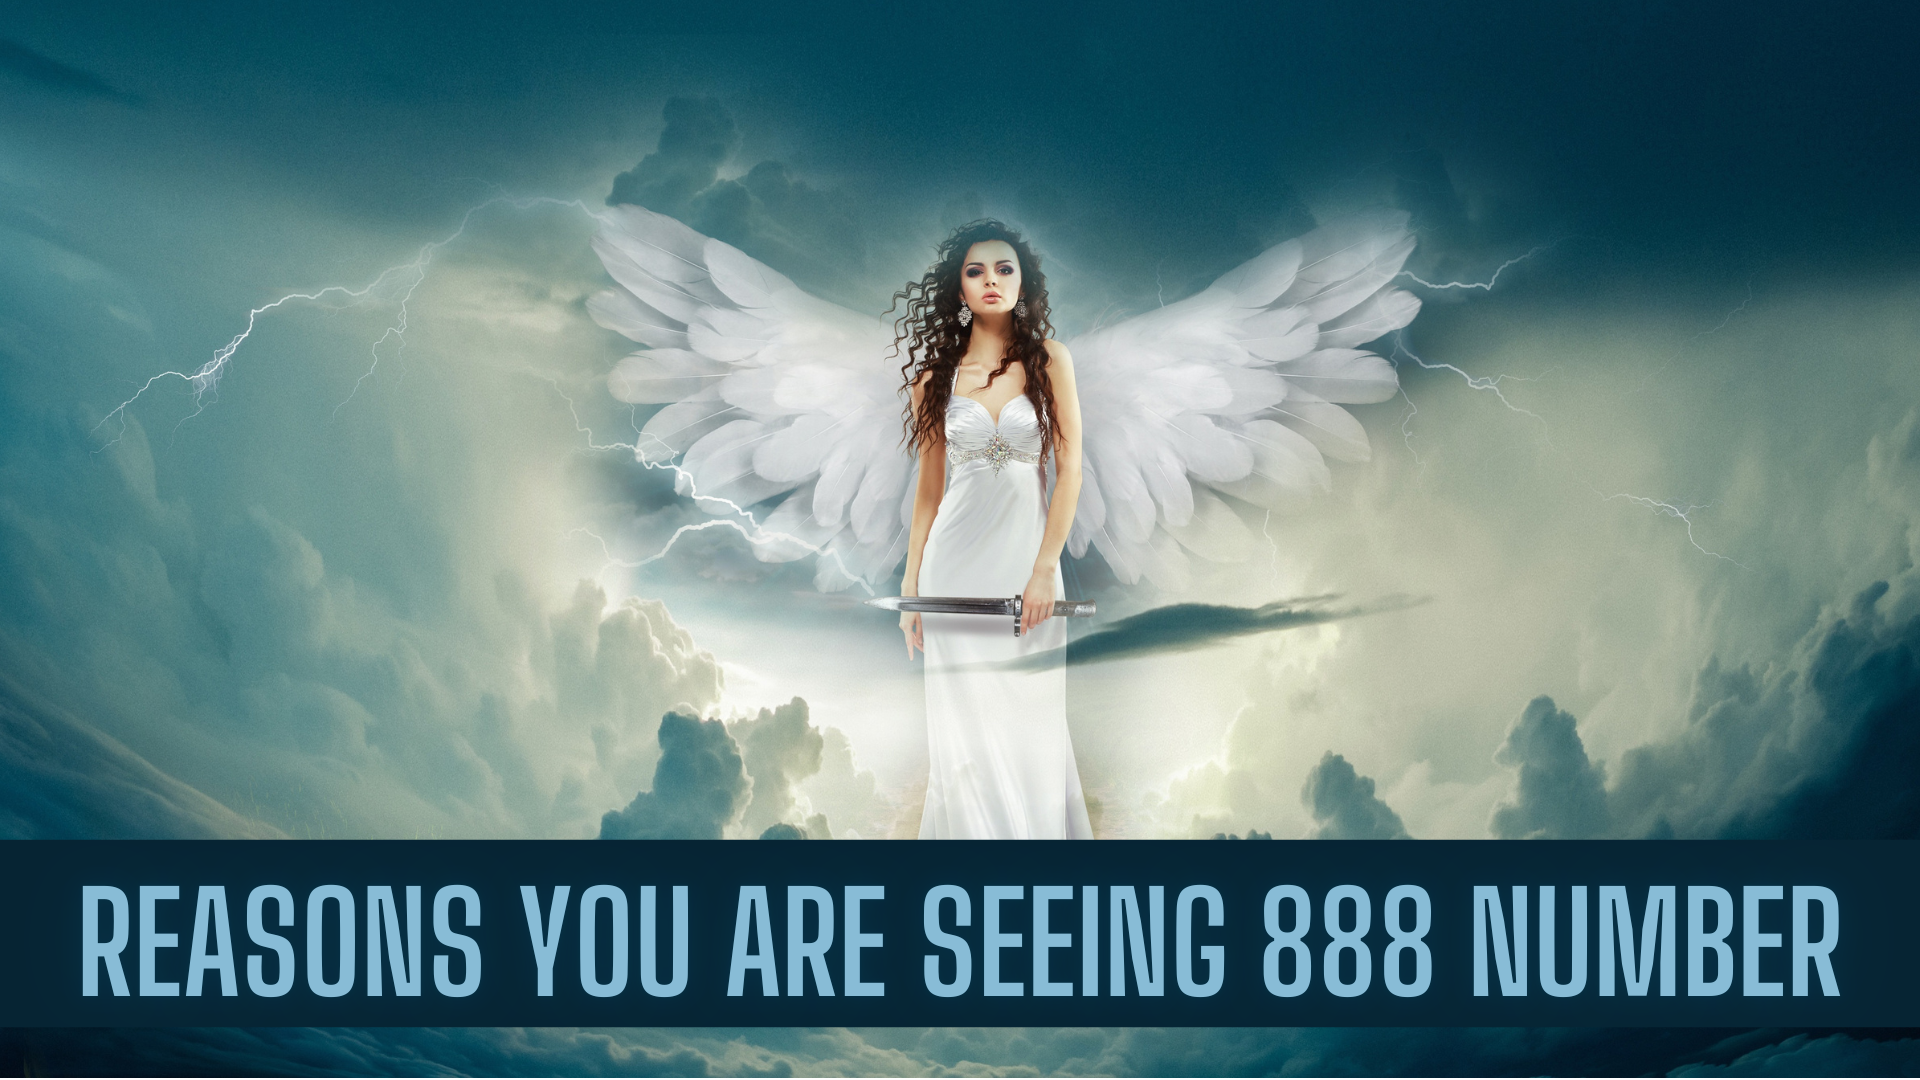 An angel holding a sword with words Reasons You Are Seeing 888 Number